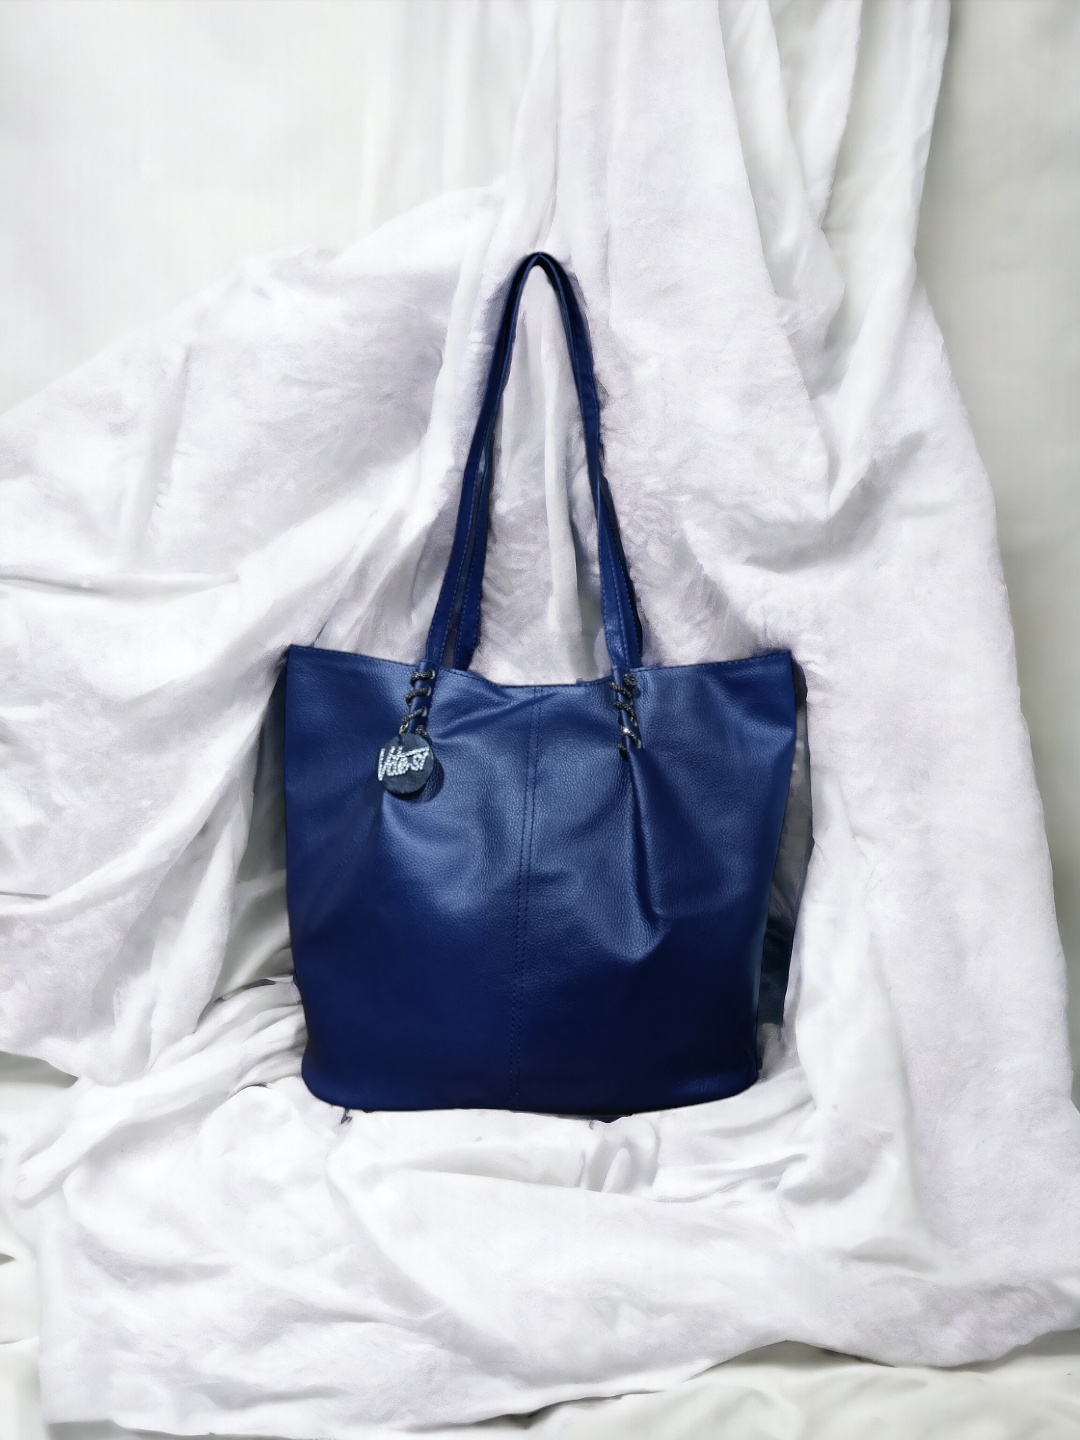 Whether you're running errands or heading to the office, our Tote Bag keeps you organized and on-trend with ease.